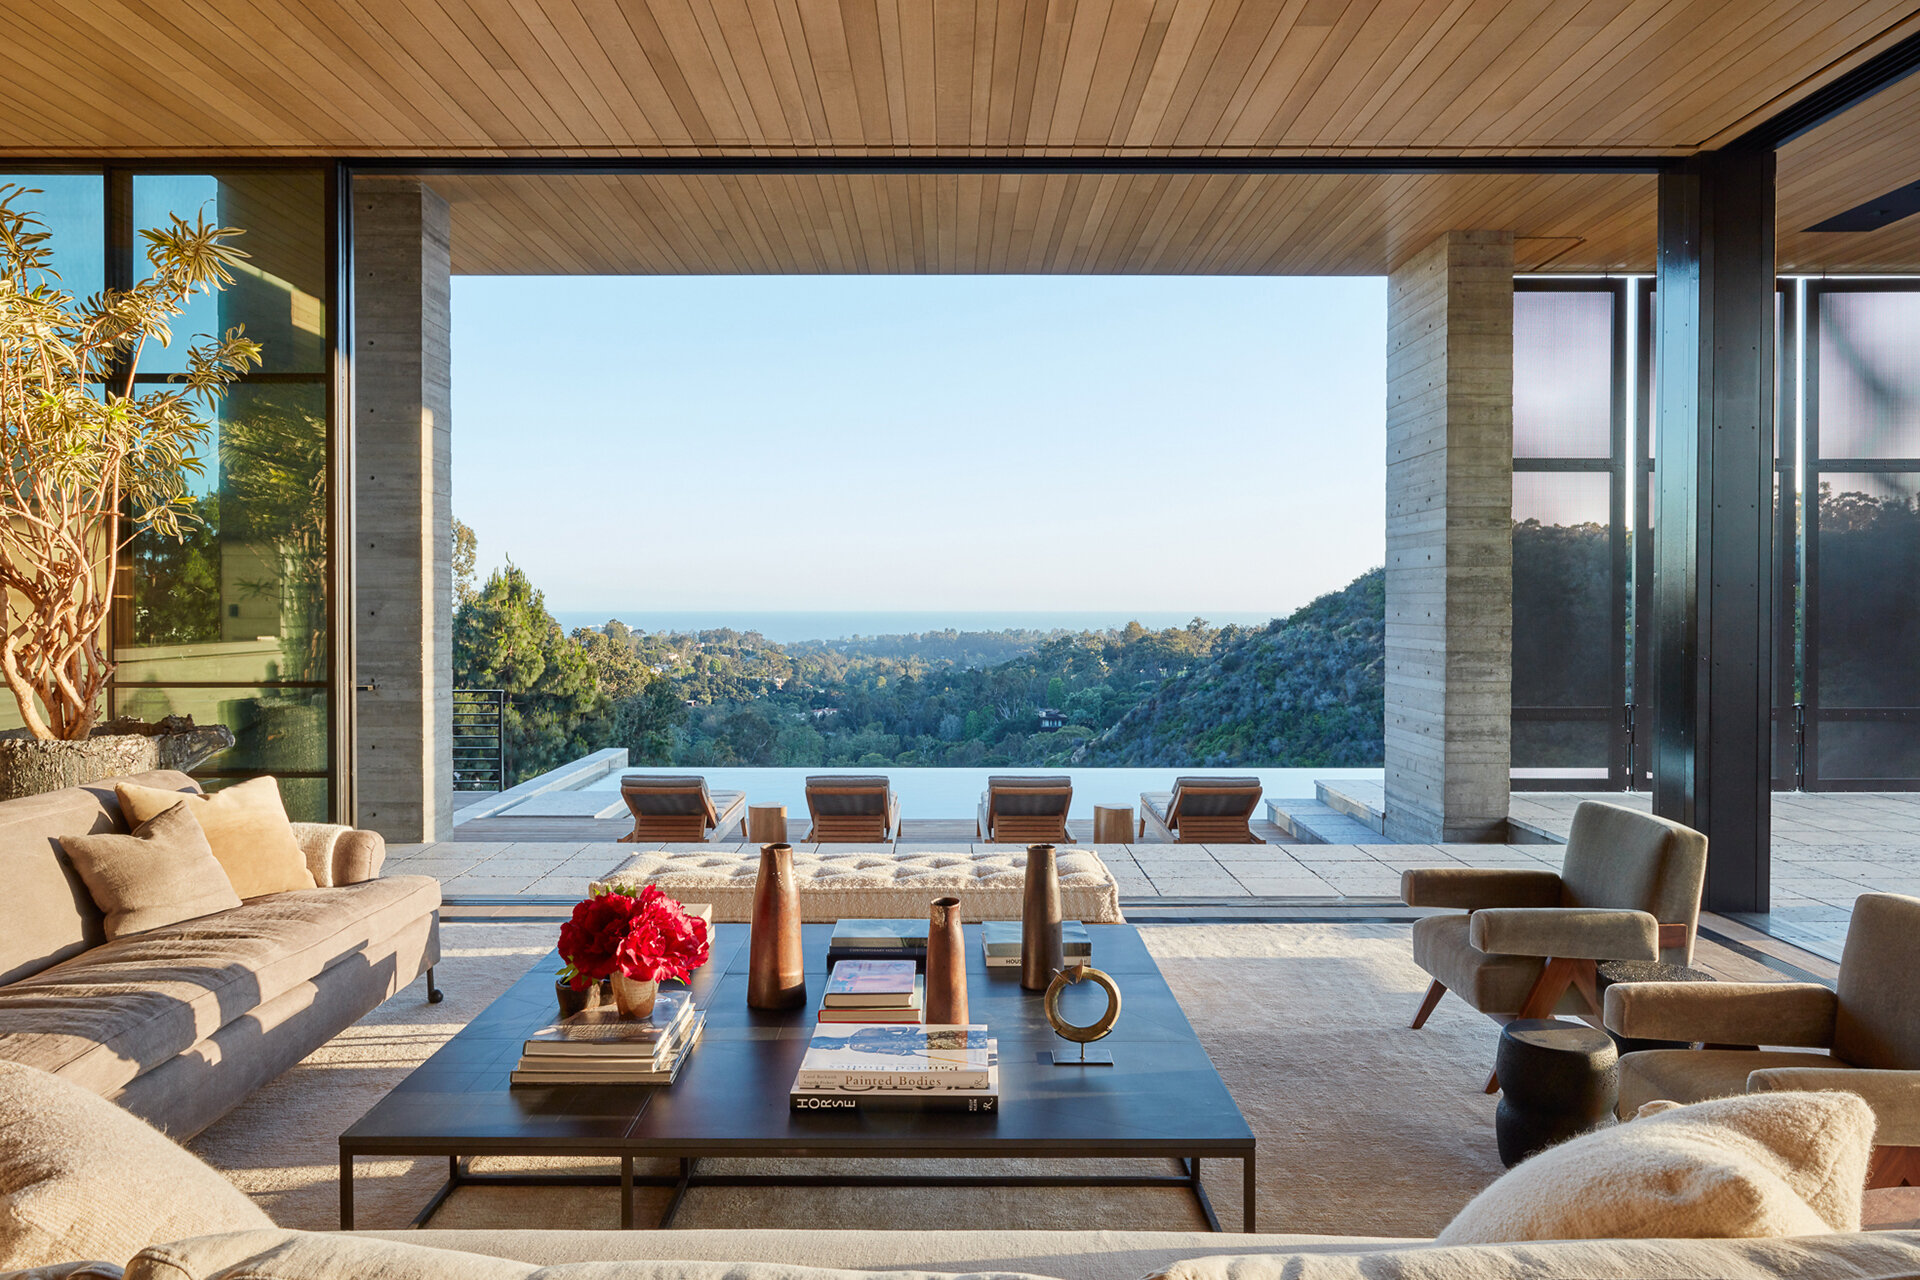  Custom luxury home general contractor built modern private residence in the Pacific Palisades neighborhood of Los Angeles featuring wood ceilings, indoor outdoor living with retractable operable metal screen walls.  